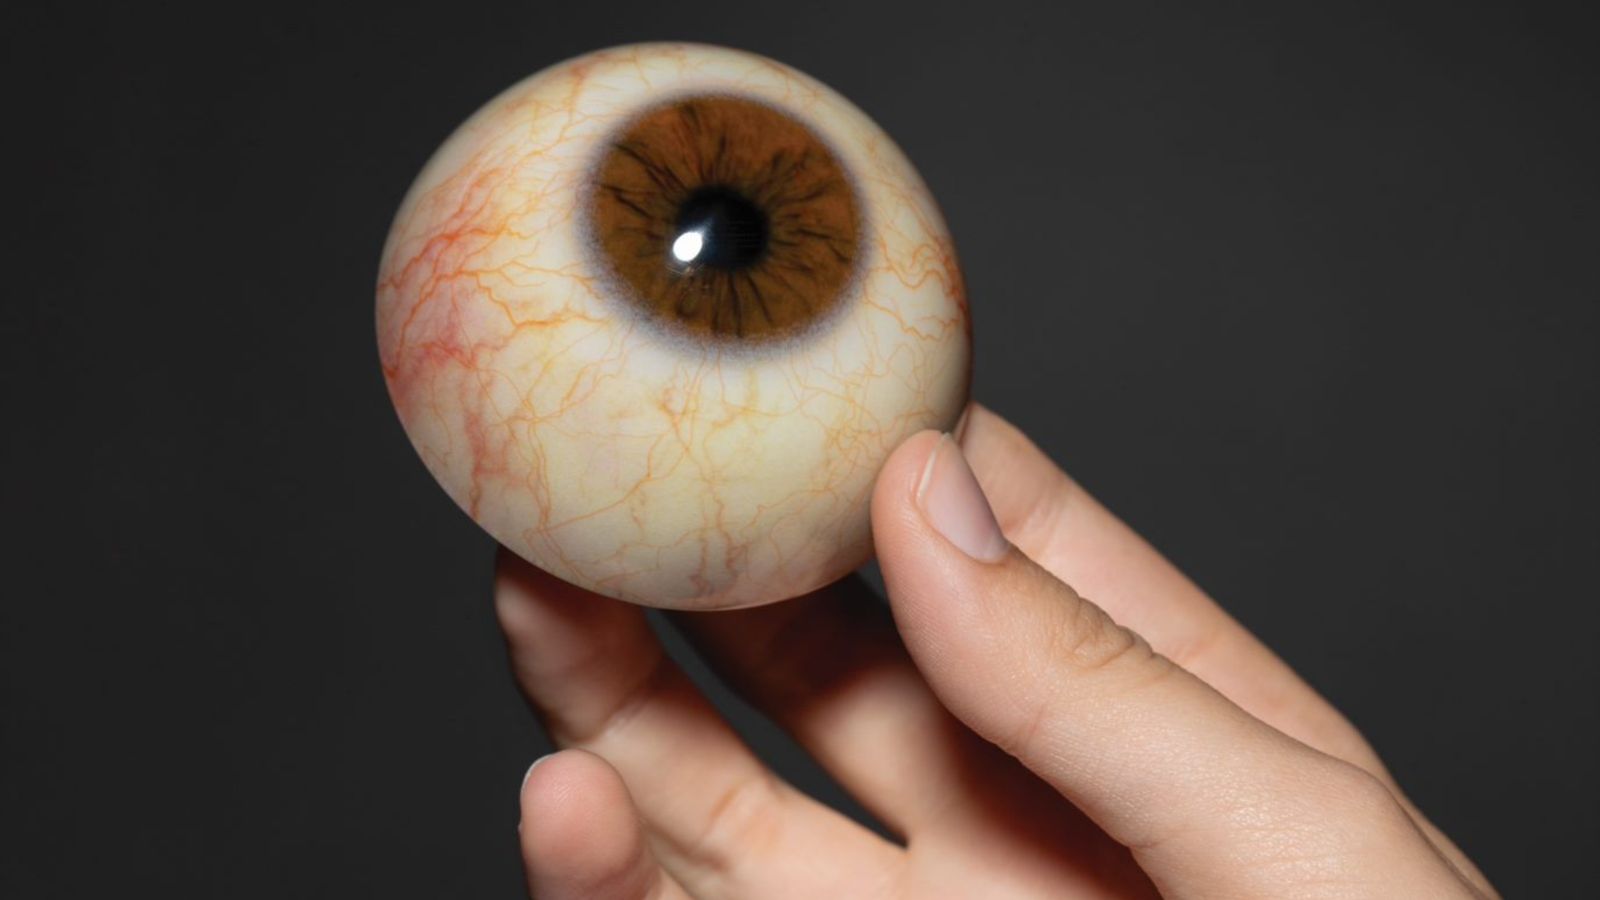 A hand holds a large prosthetic eye.